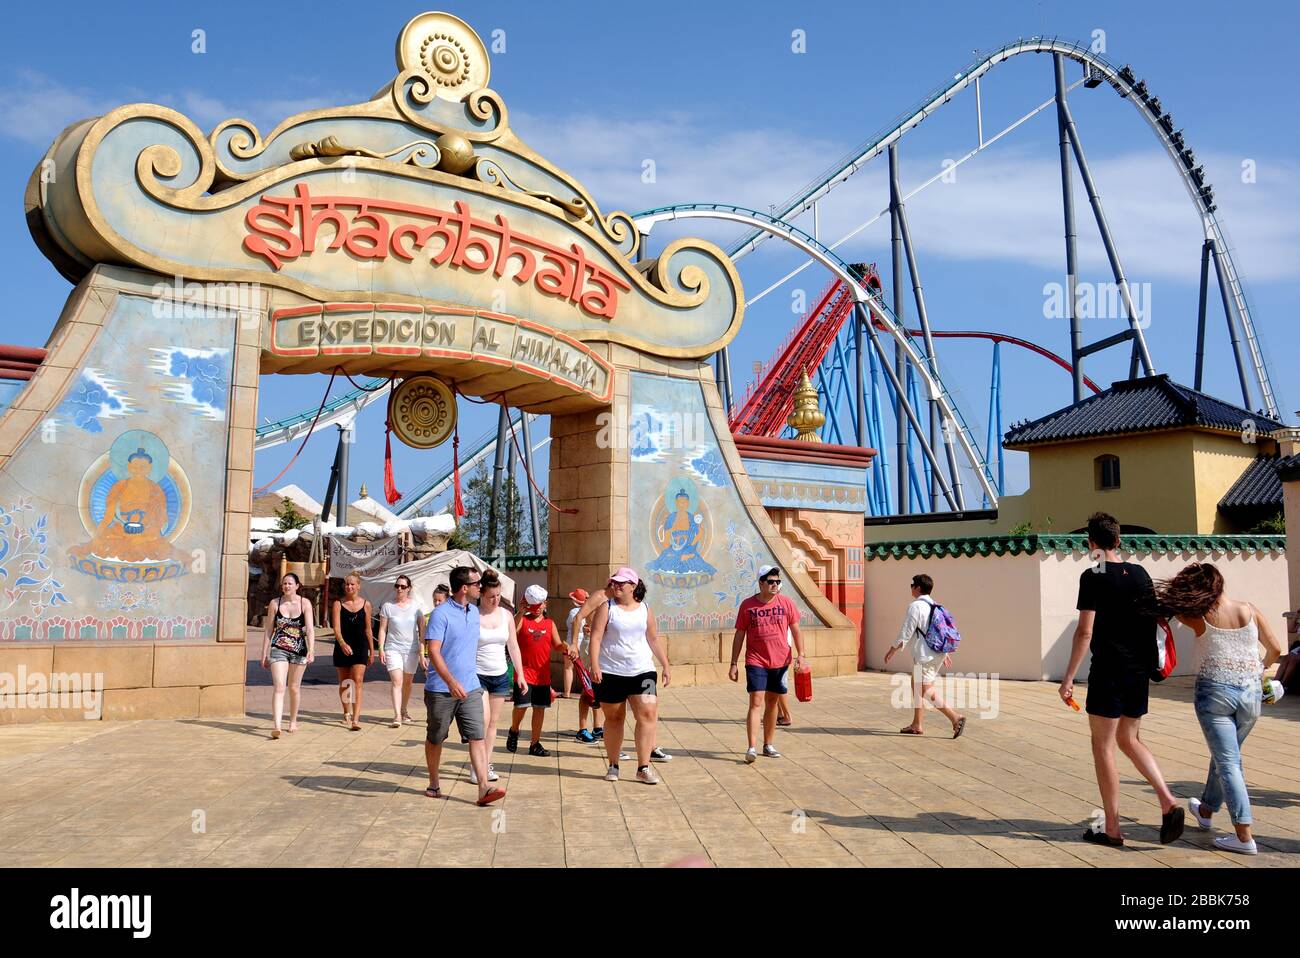 EDITOR'S NOTE: Image Archived 25/07/2015)Entrance to the Shambhala  attraction in the PortAventura World theme park. Due to the Covid-19  coronavirus crisis, PortAventura World theme park may lose 50% of its  income this